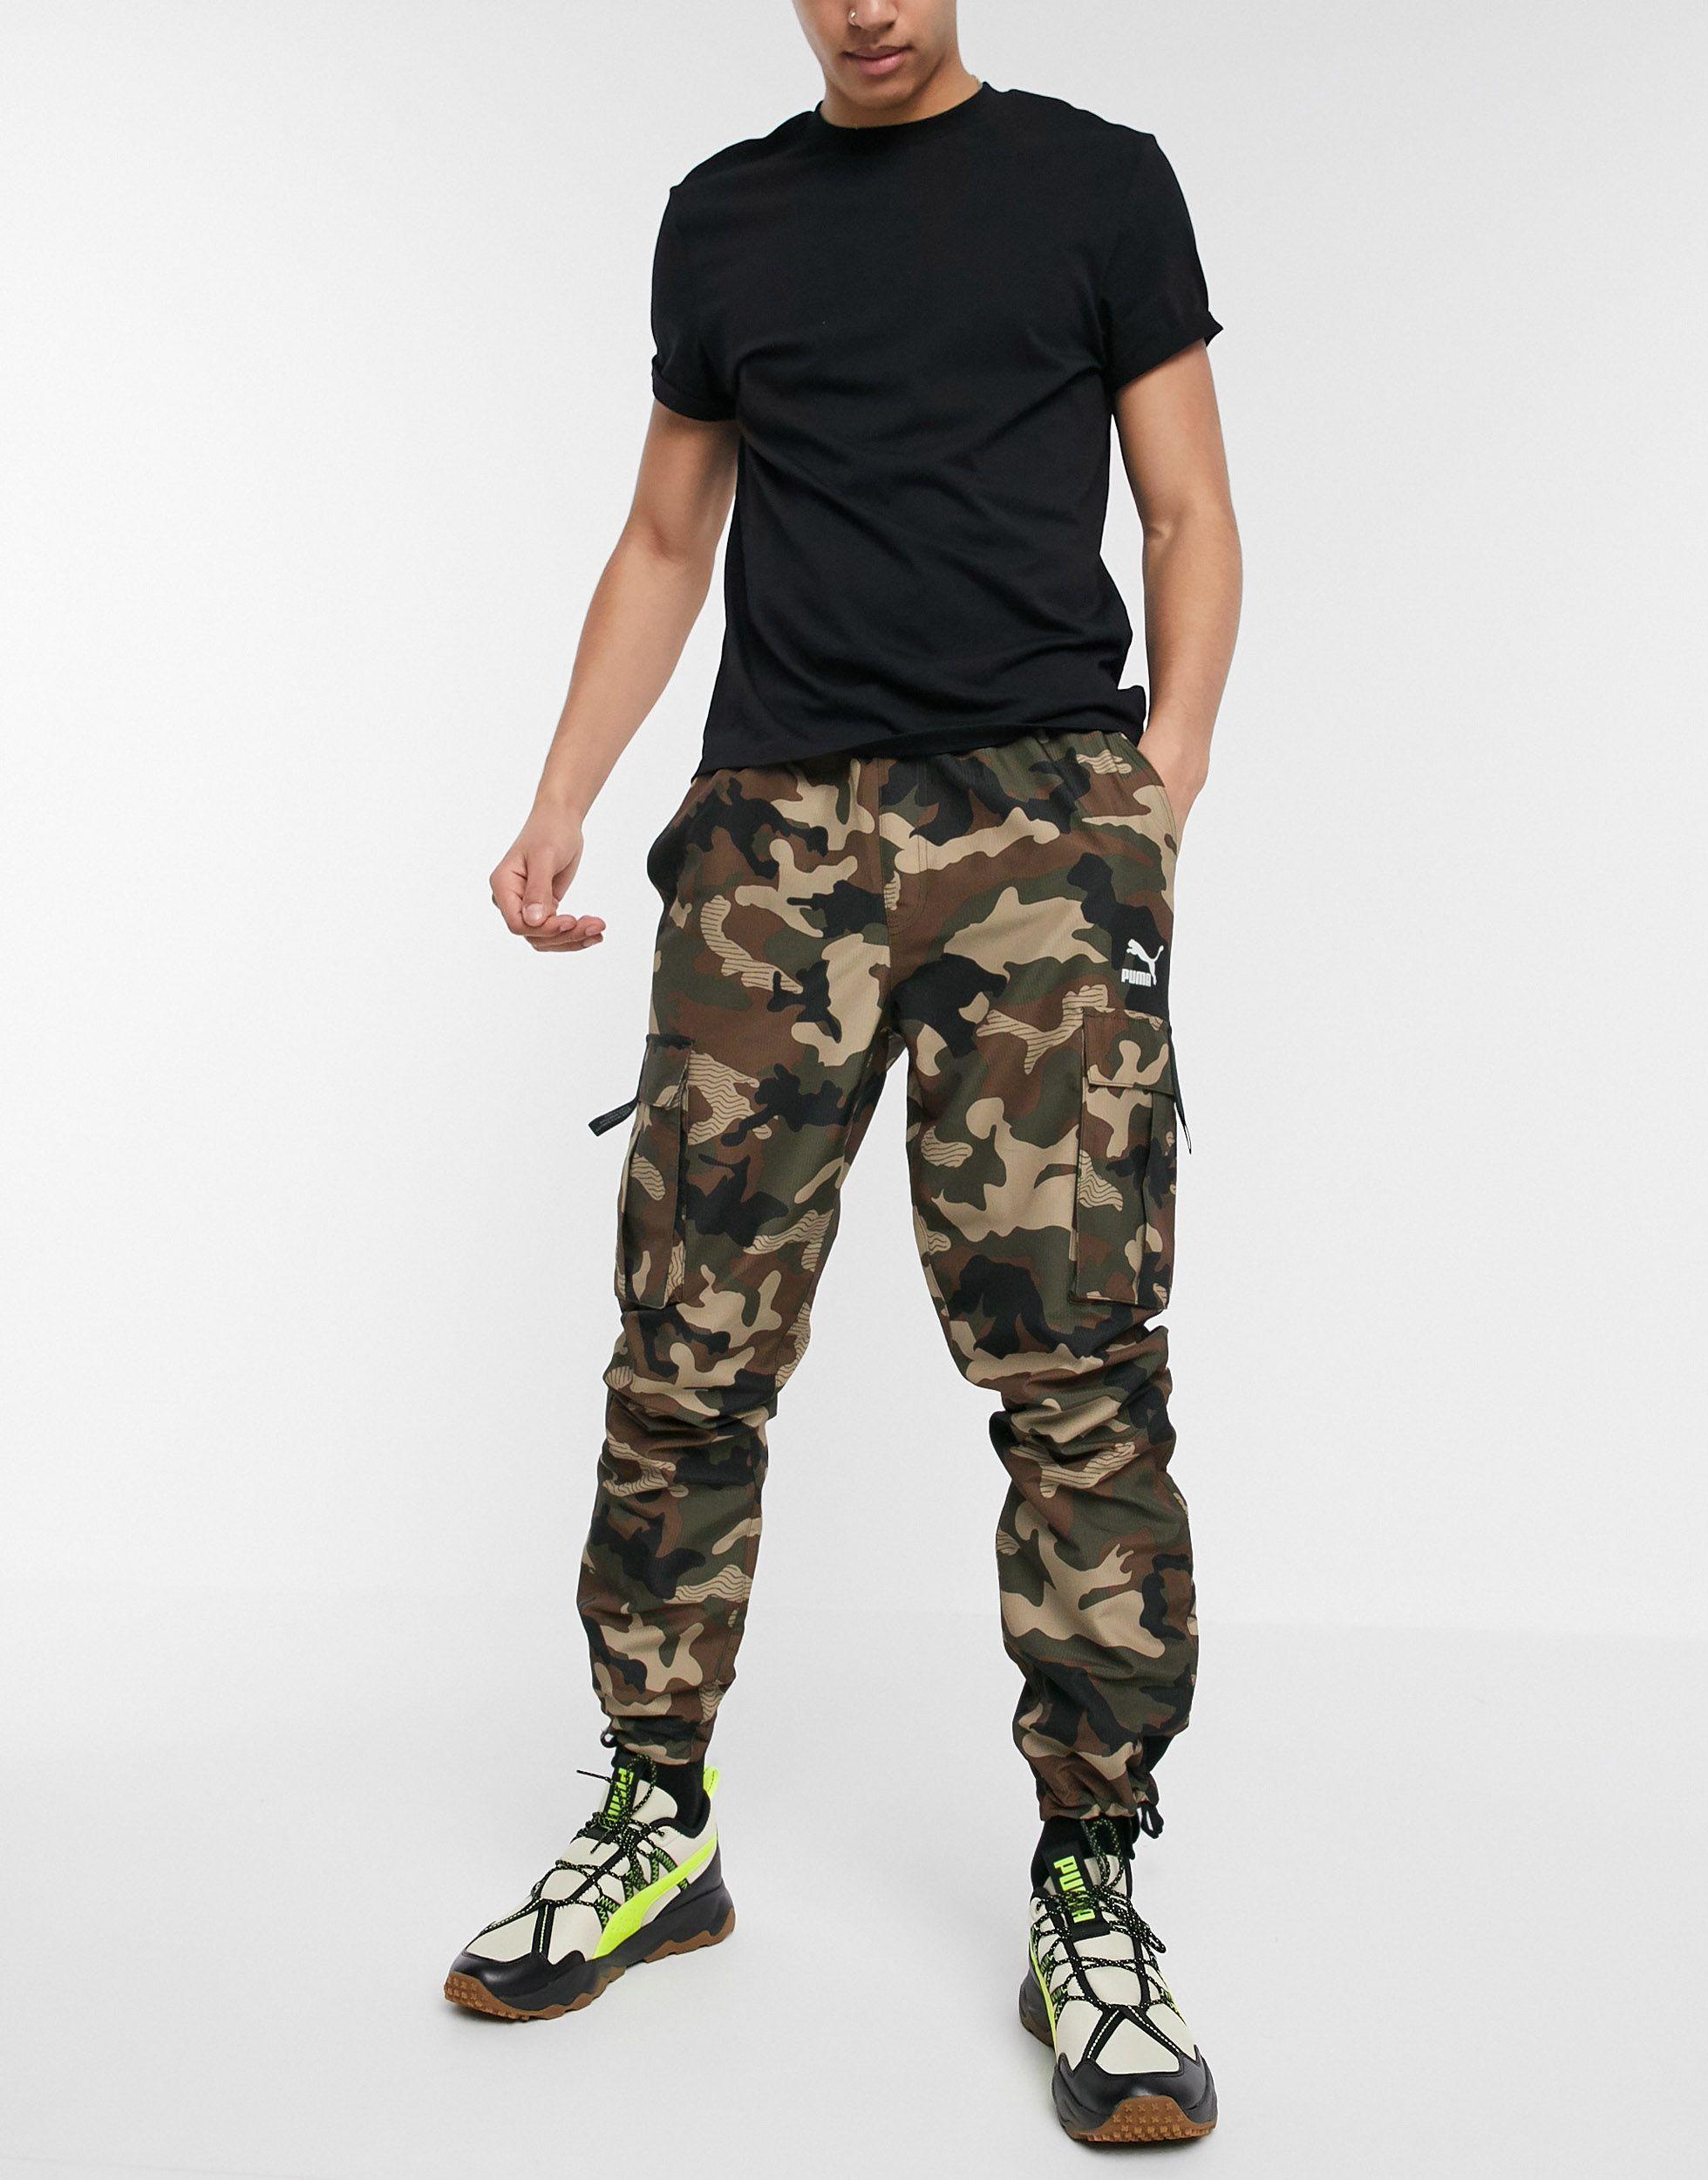 PUMA Synthetic Camo Cargo Pants in Green for Men - Lyst